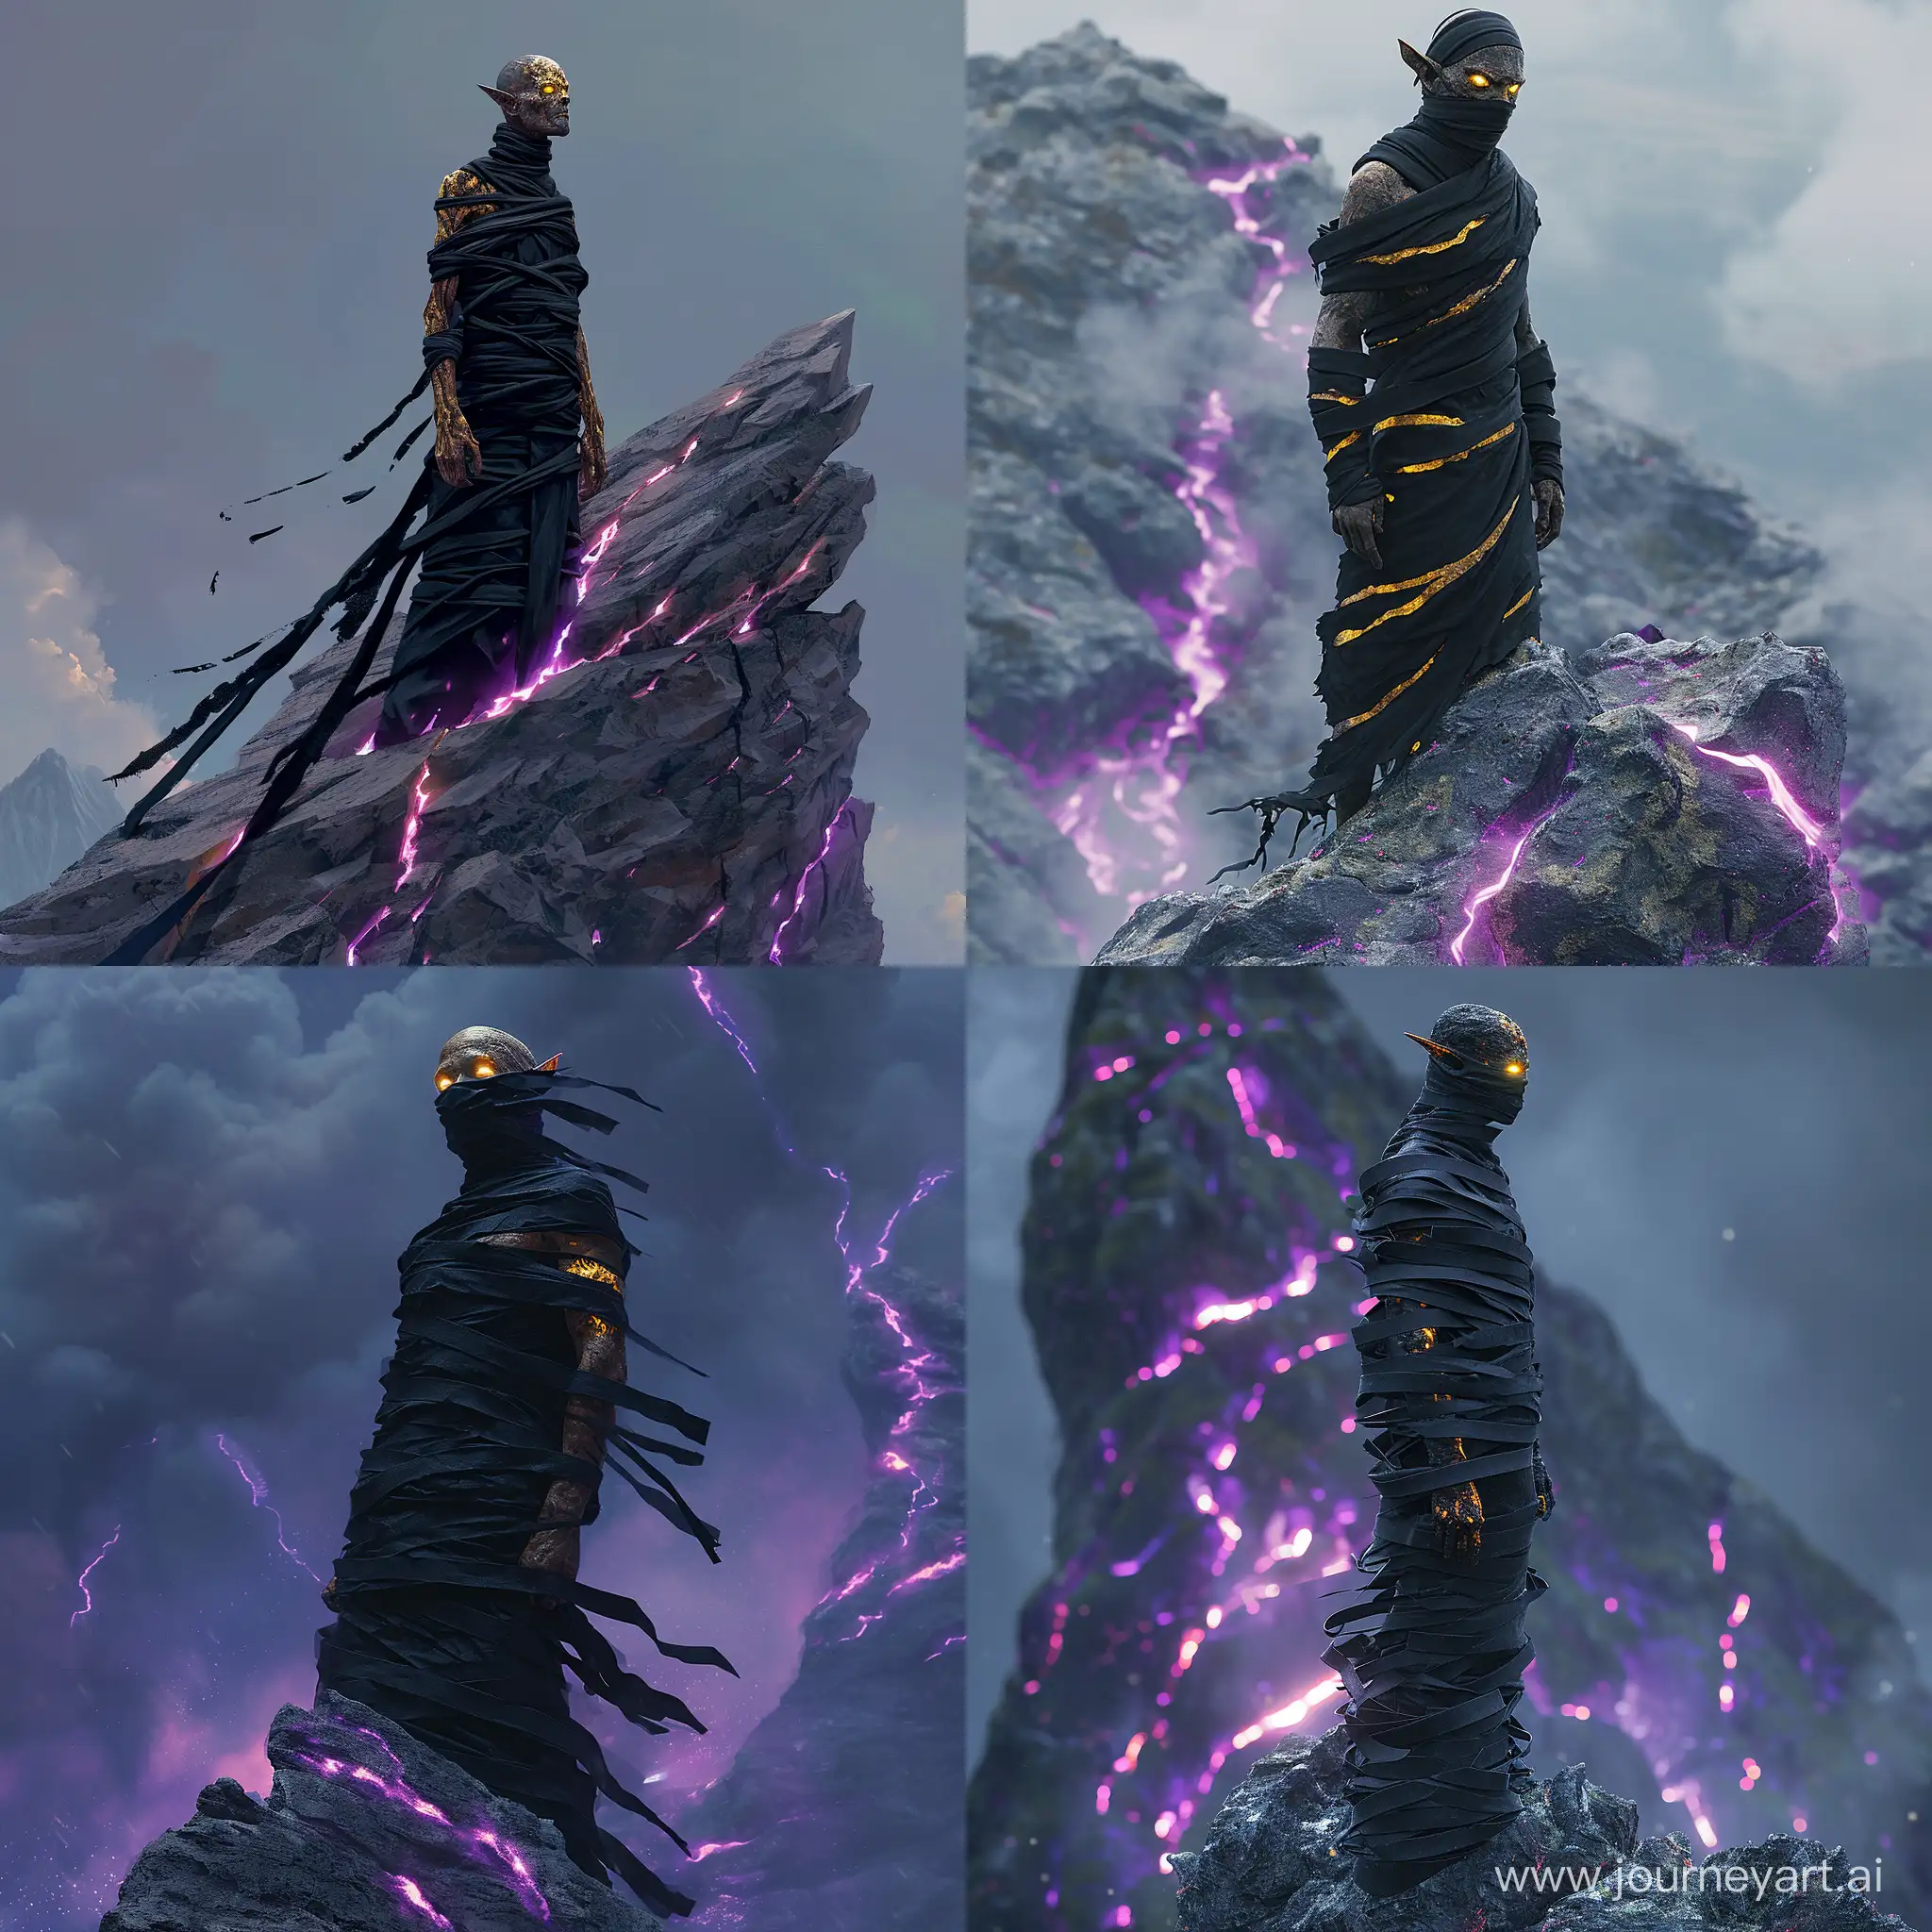 A high elf corrupted by black magics, wrapped in black strips of cloth to conceal his charred skin. Gold glowing eyes. He stands on the summit of a mountain with glowing purple fissures. He looks out in the distance, side view, epic shot, immersive fantasy setting